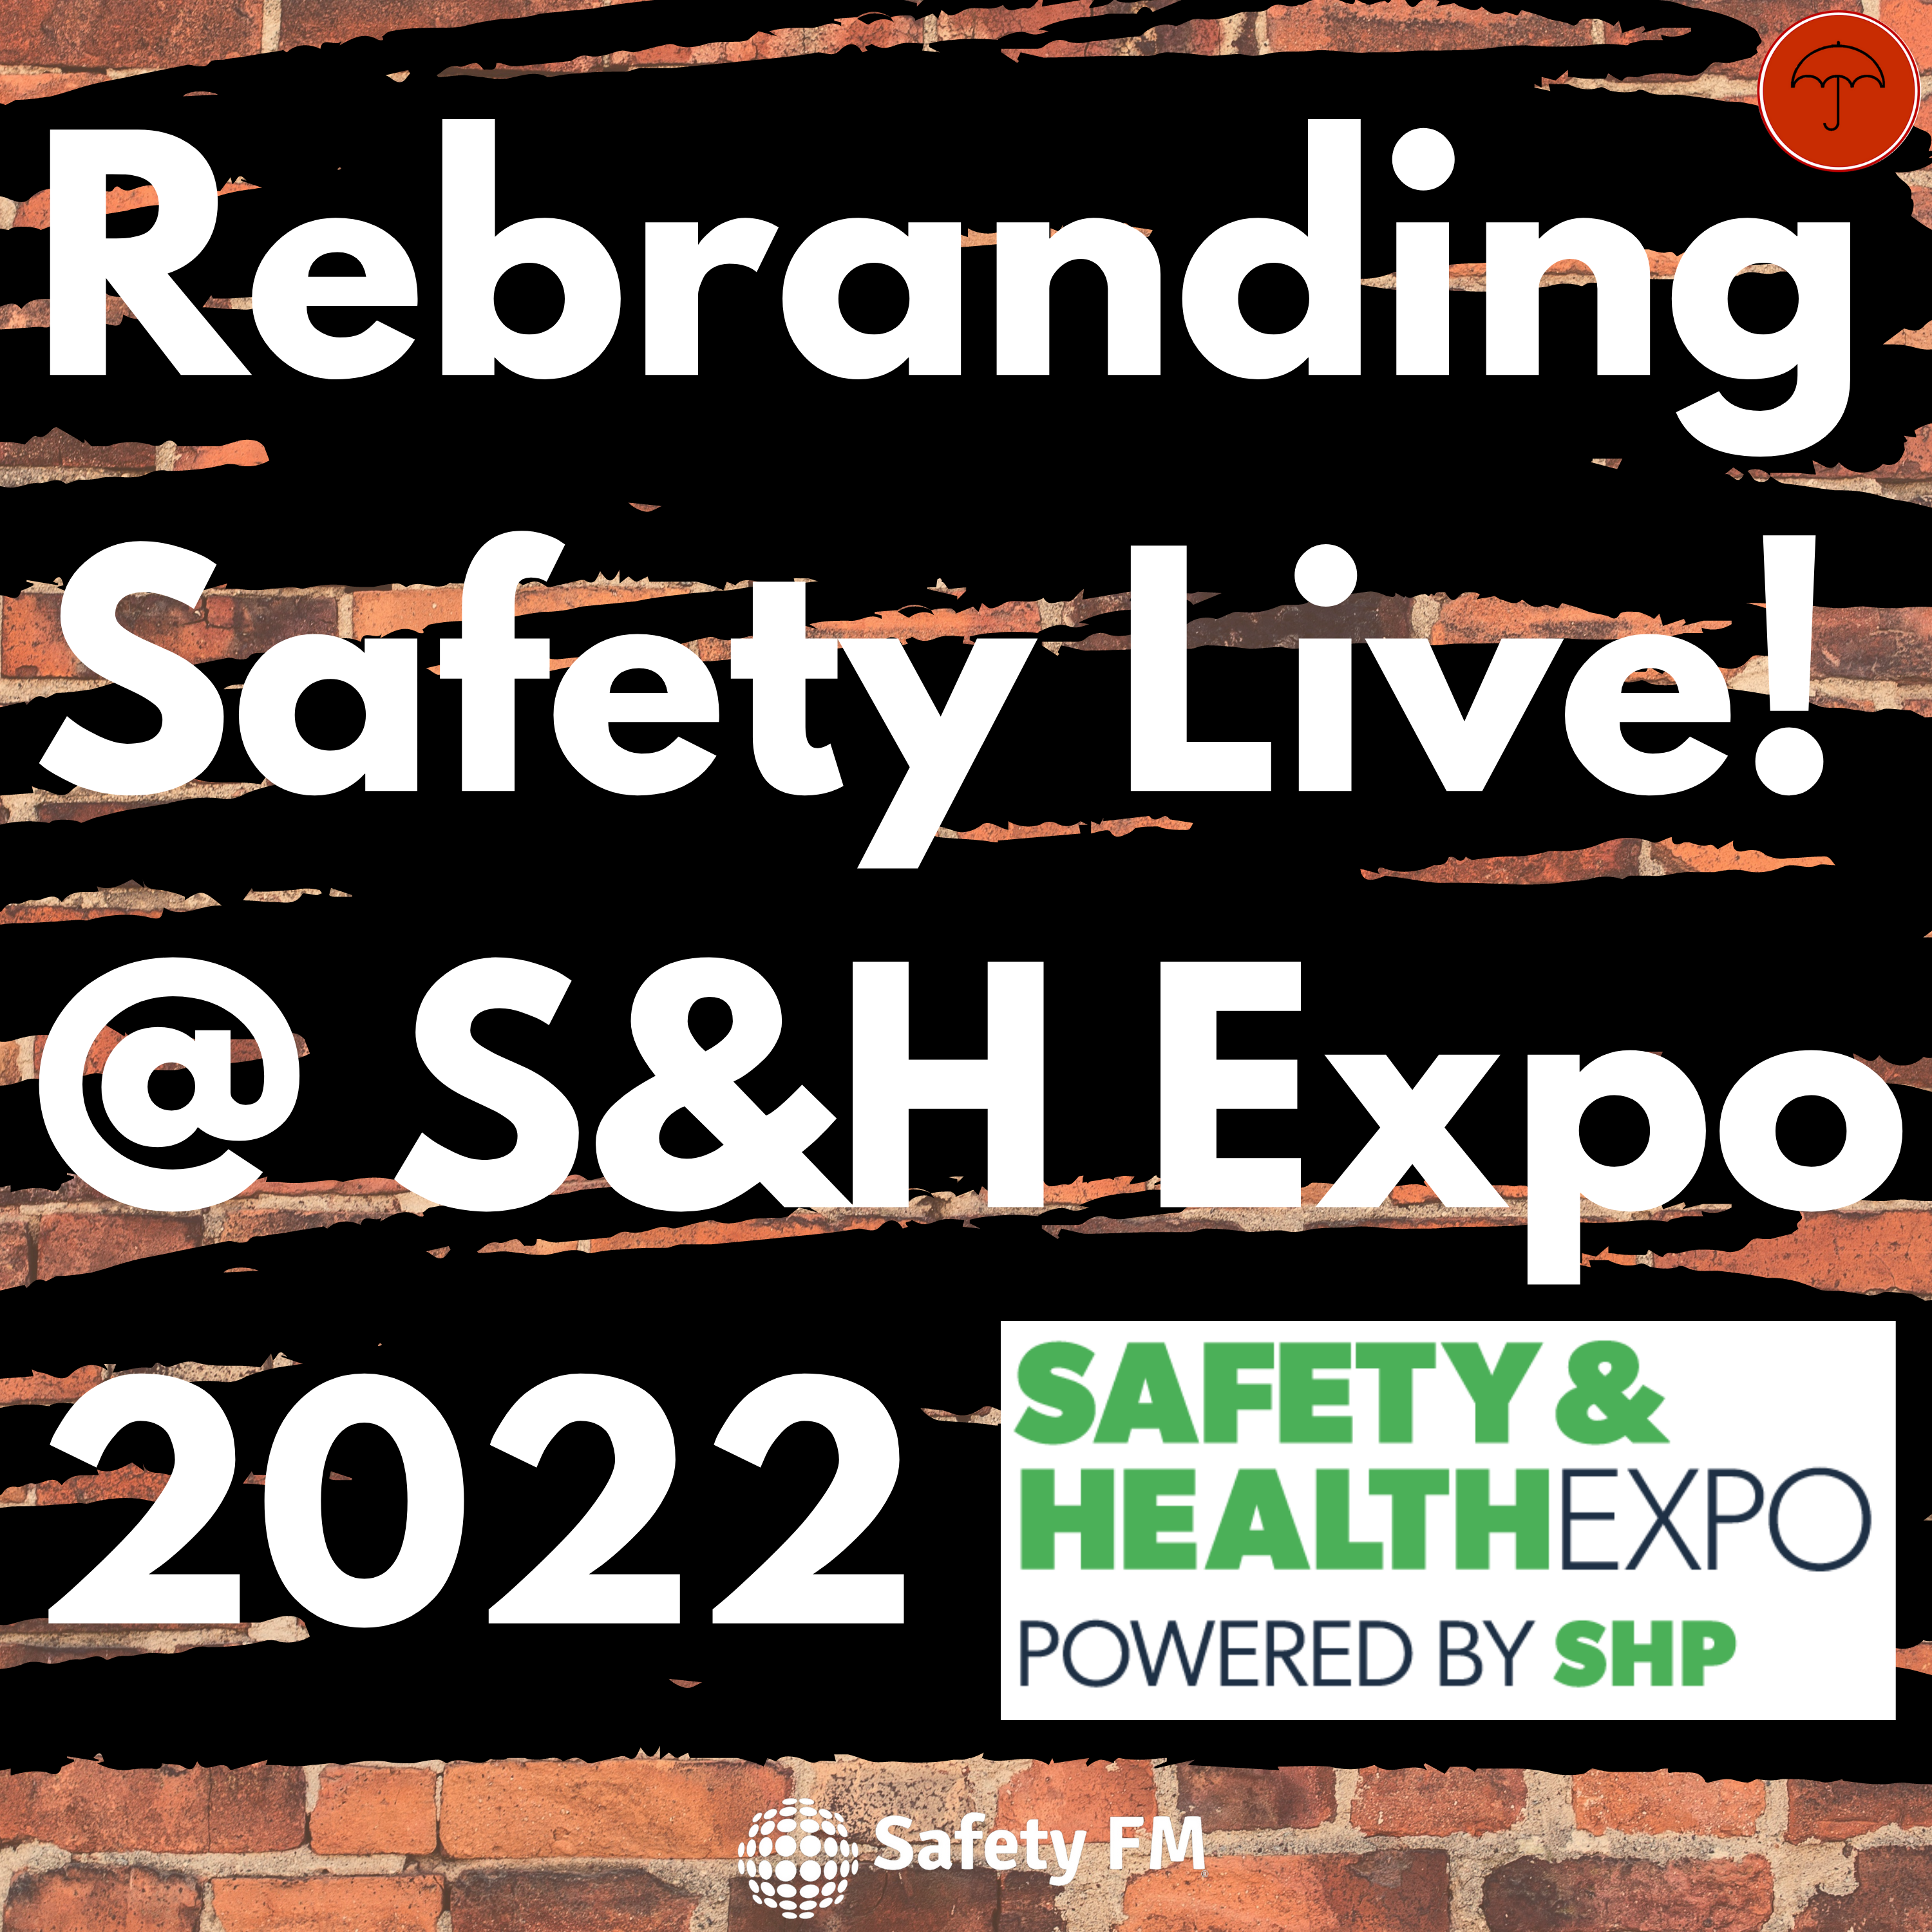 Rebranding Safety Live! at the SHP Safety and Health Expo 2022